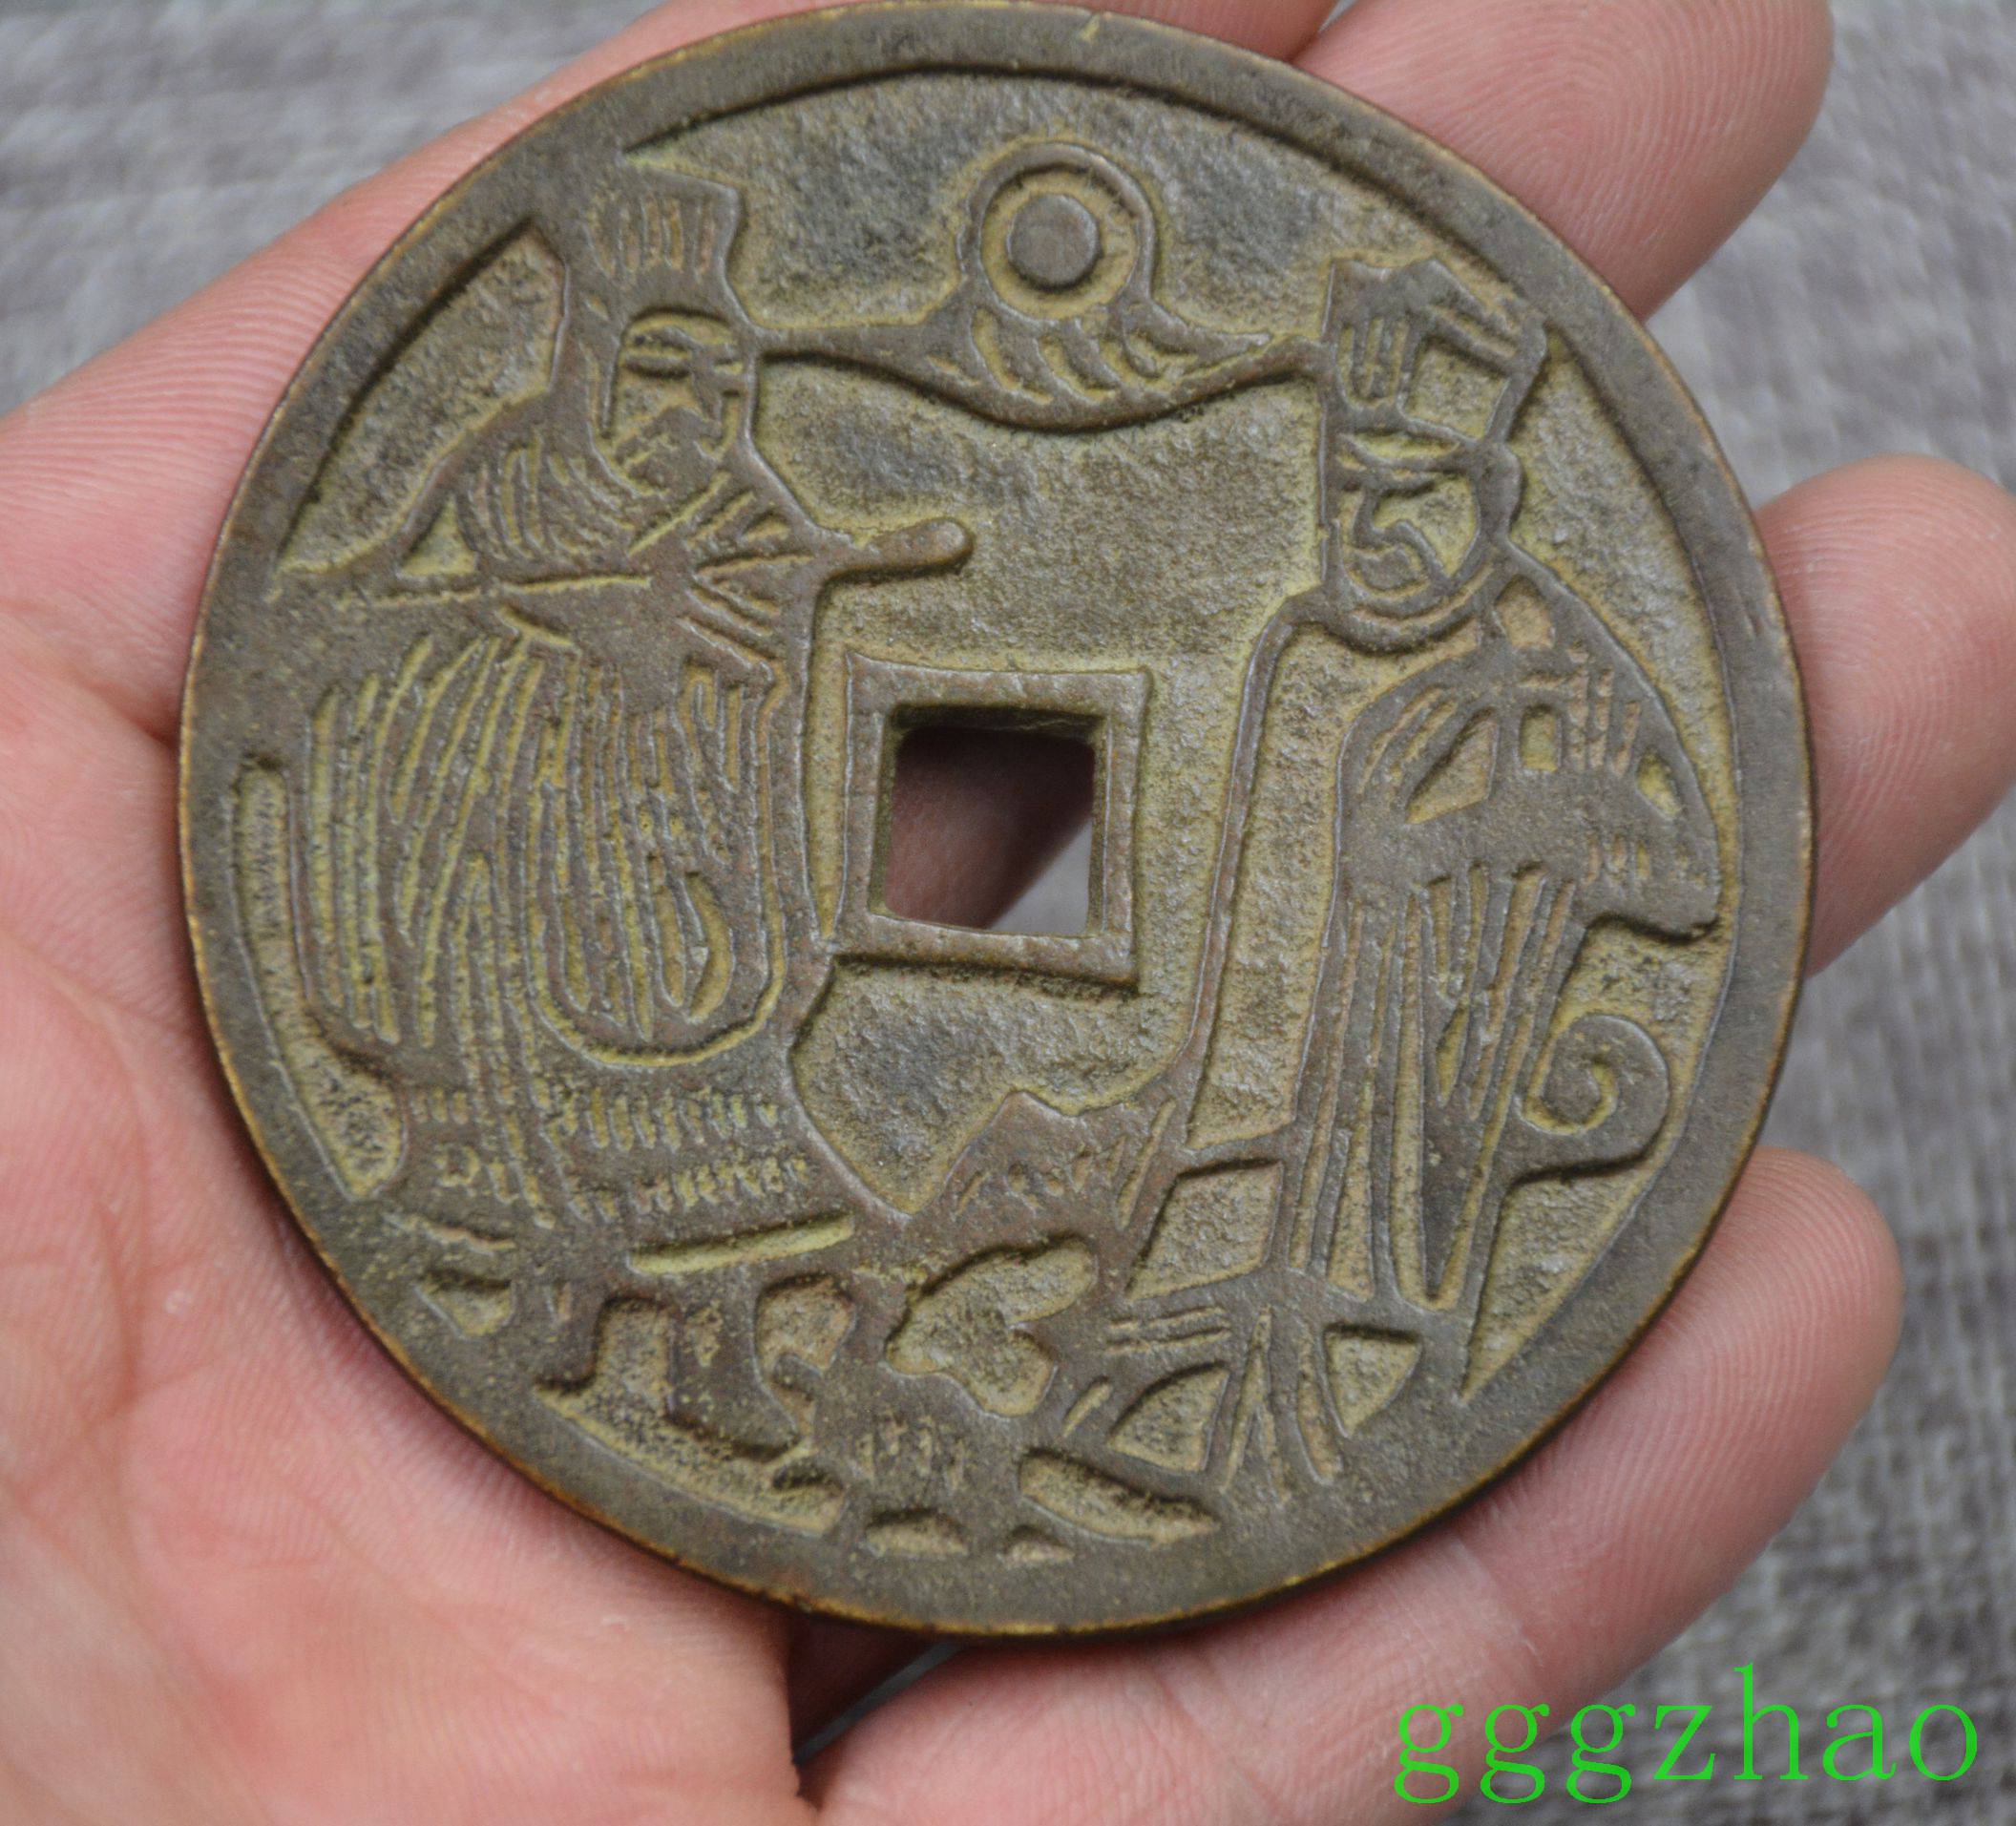 Old coins in ancient China coins evil spirits gossip mirror | eBay